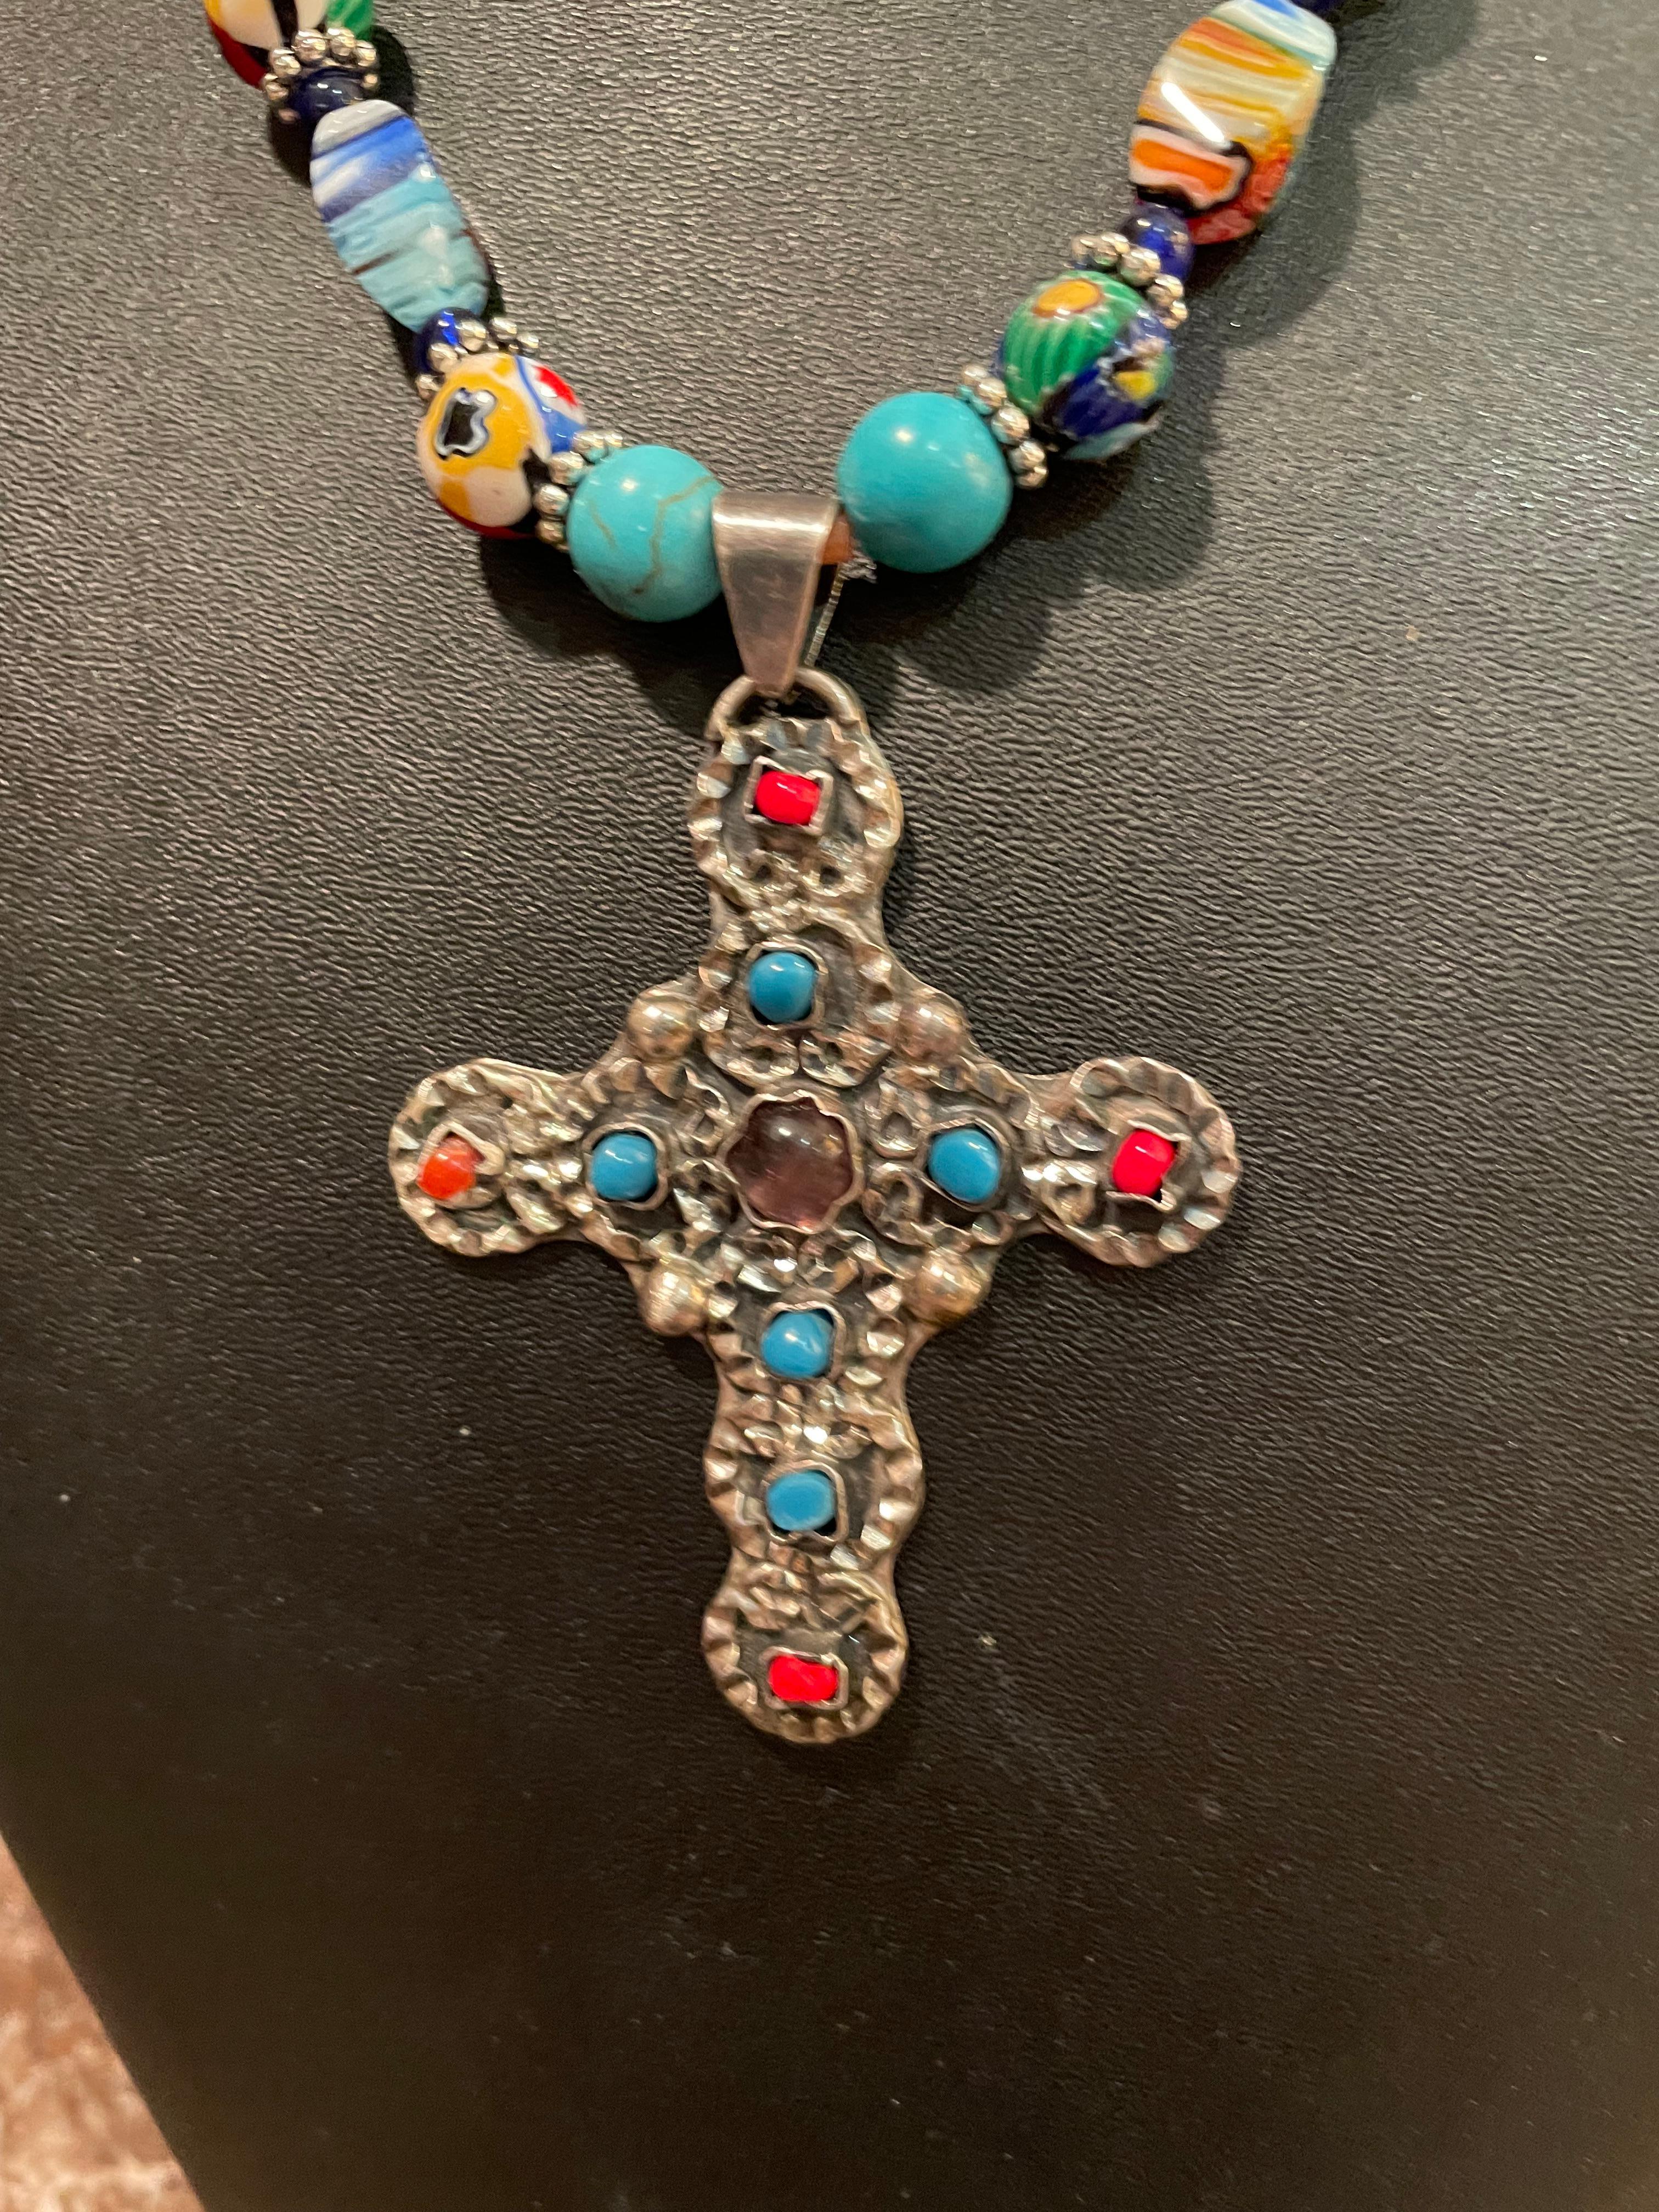 LB offers a one of a kind, handmade, Vintage, Mexican inlaid, Sterling Silver Cross Pendant on a string of vintage handmade Venetian glass beads. This colorful and fantastic piece, with the inclusion of Turquoise rounds and vintage cobalt blue